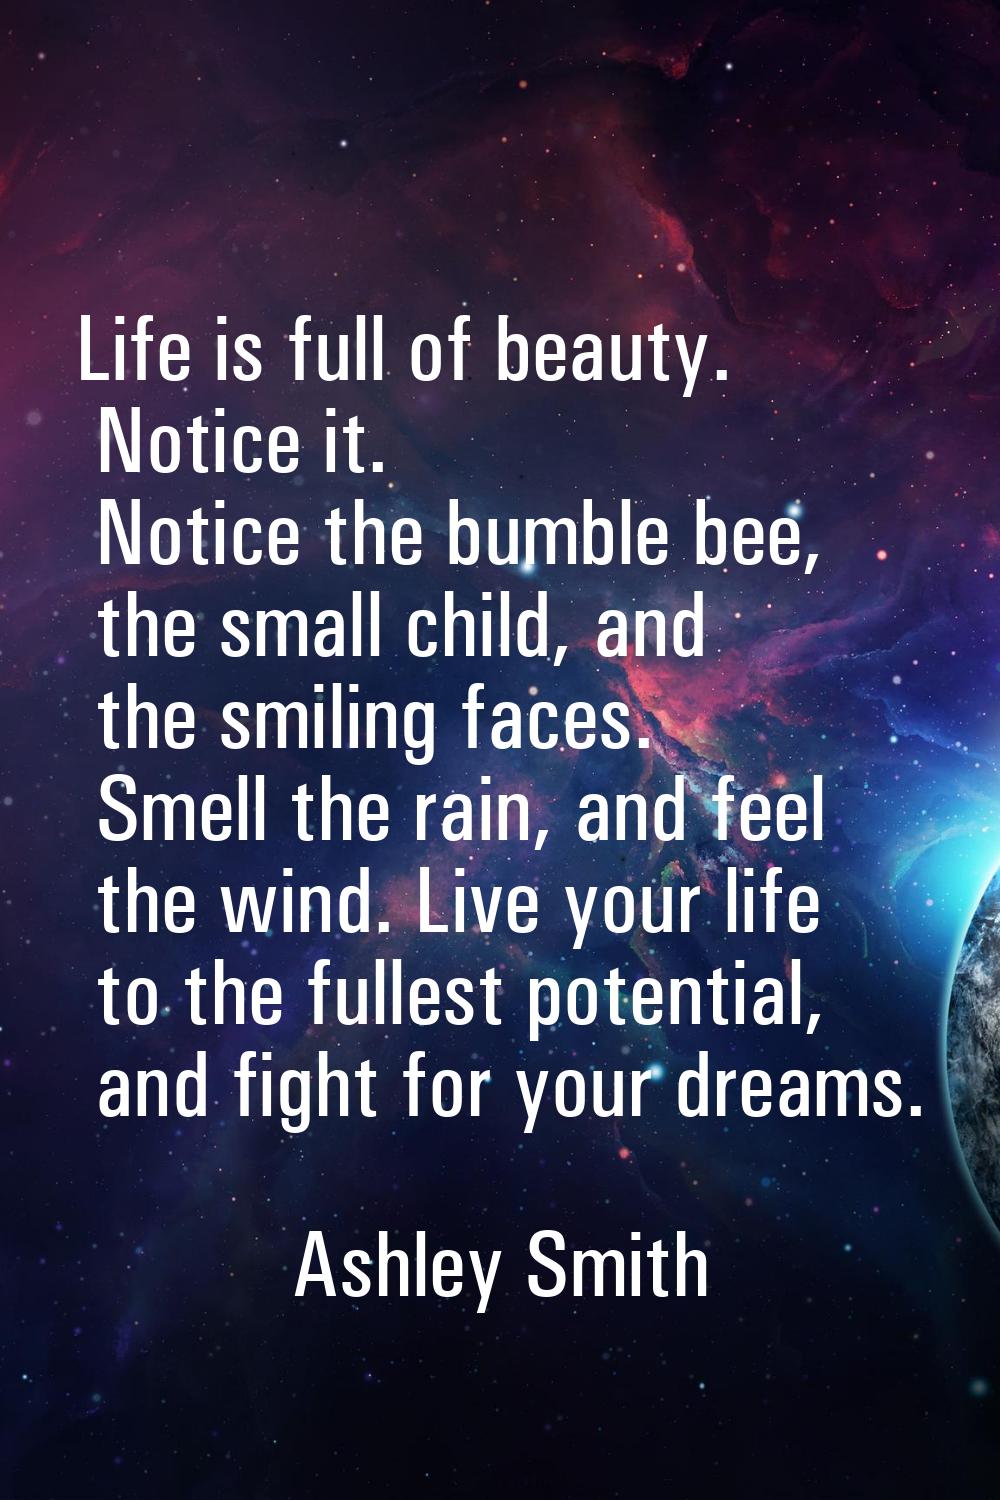 Life is full of beauty. Notice it. Notice the bumble bee, the small child, and the smiling faces. S